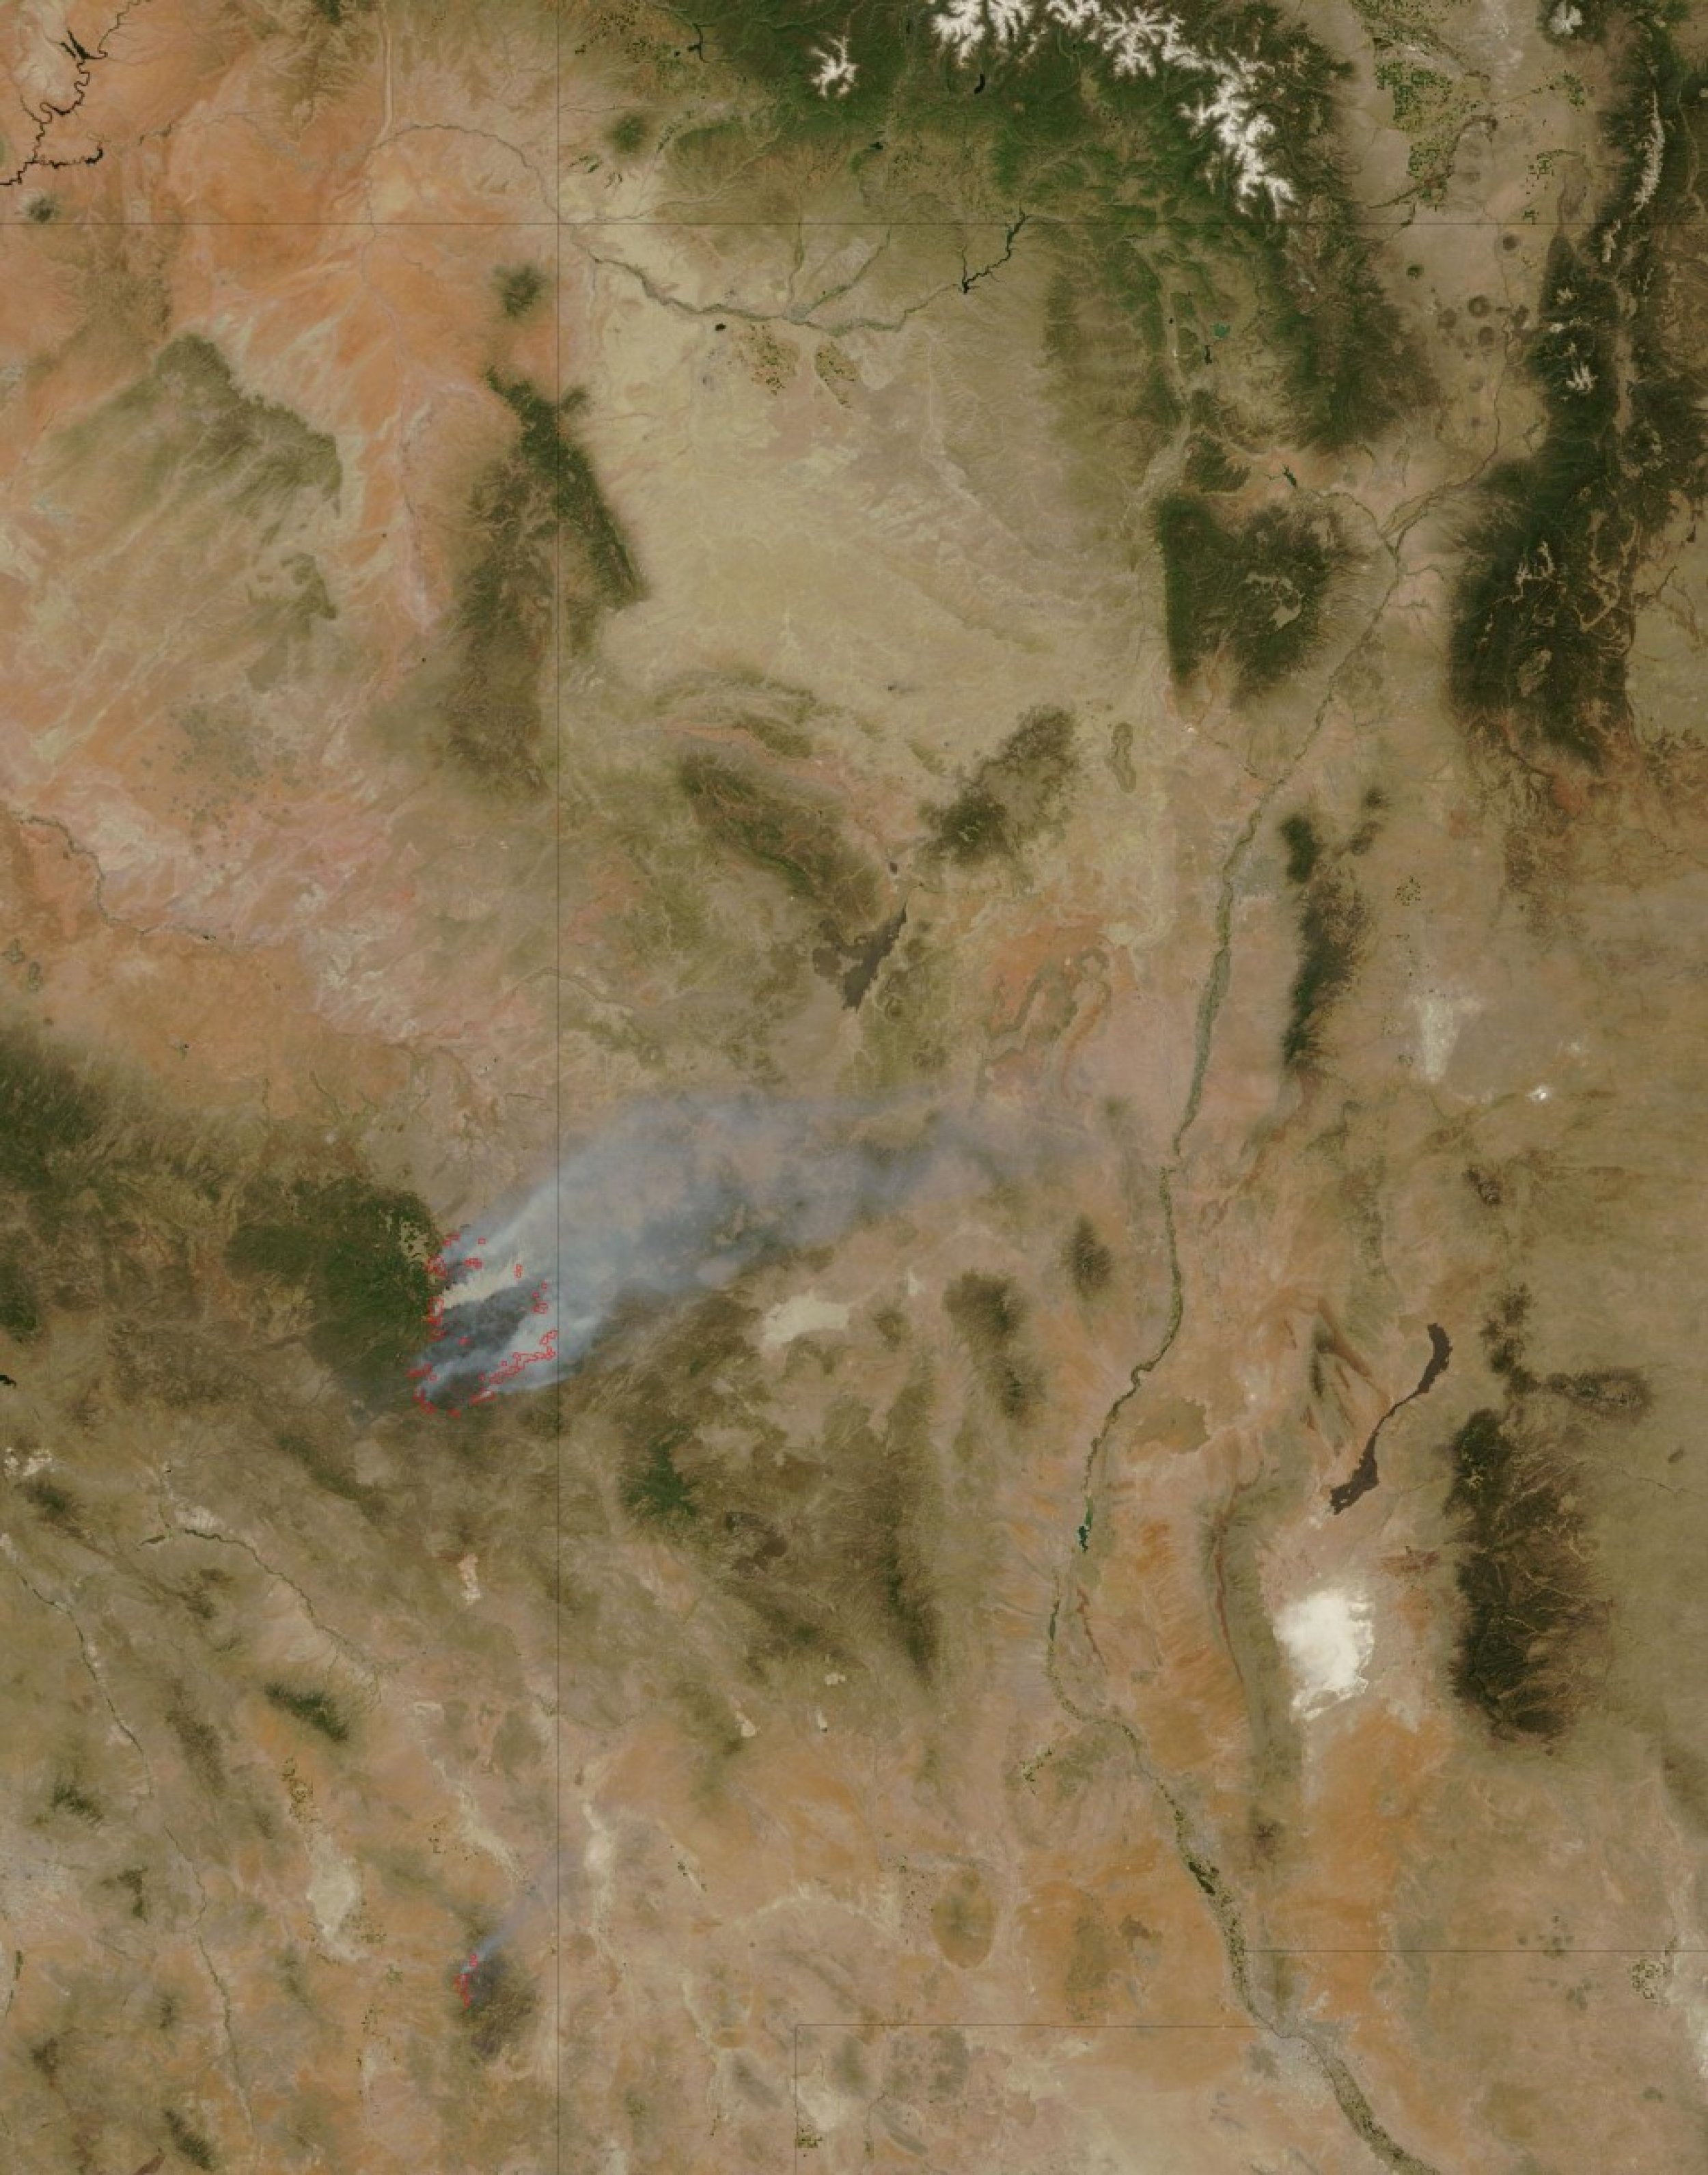 Arizona Wallow Wildfire Detailed NASA photo-gallery shows dangerous air conditions.